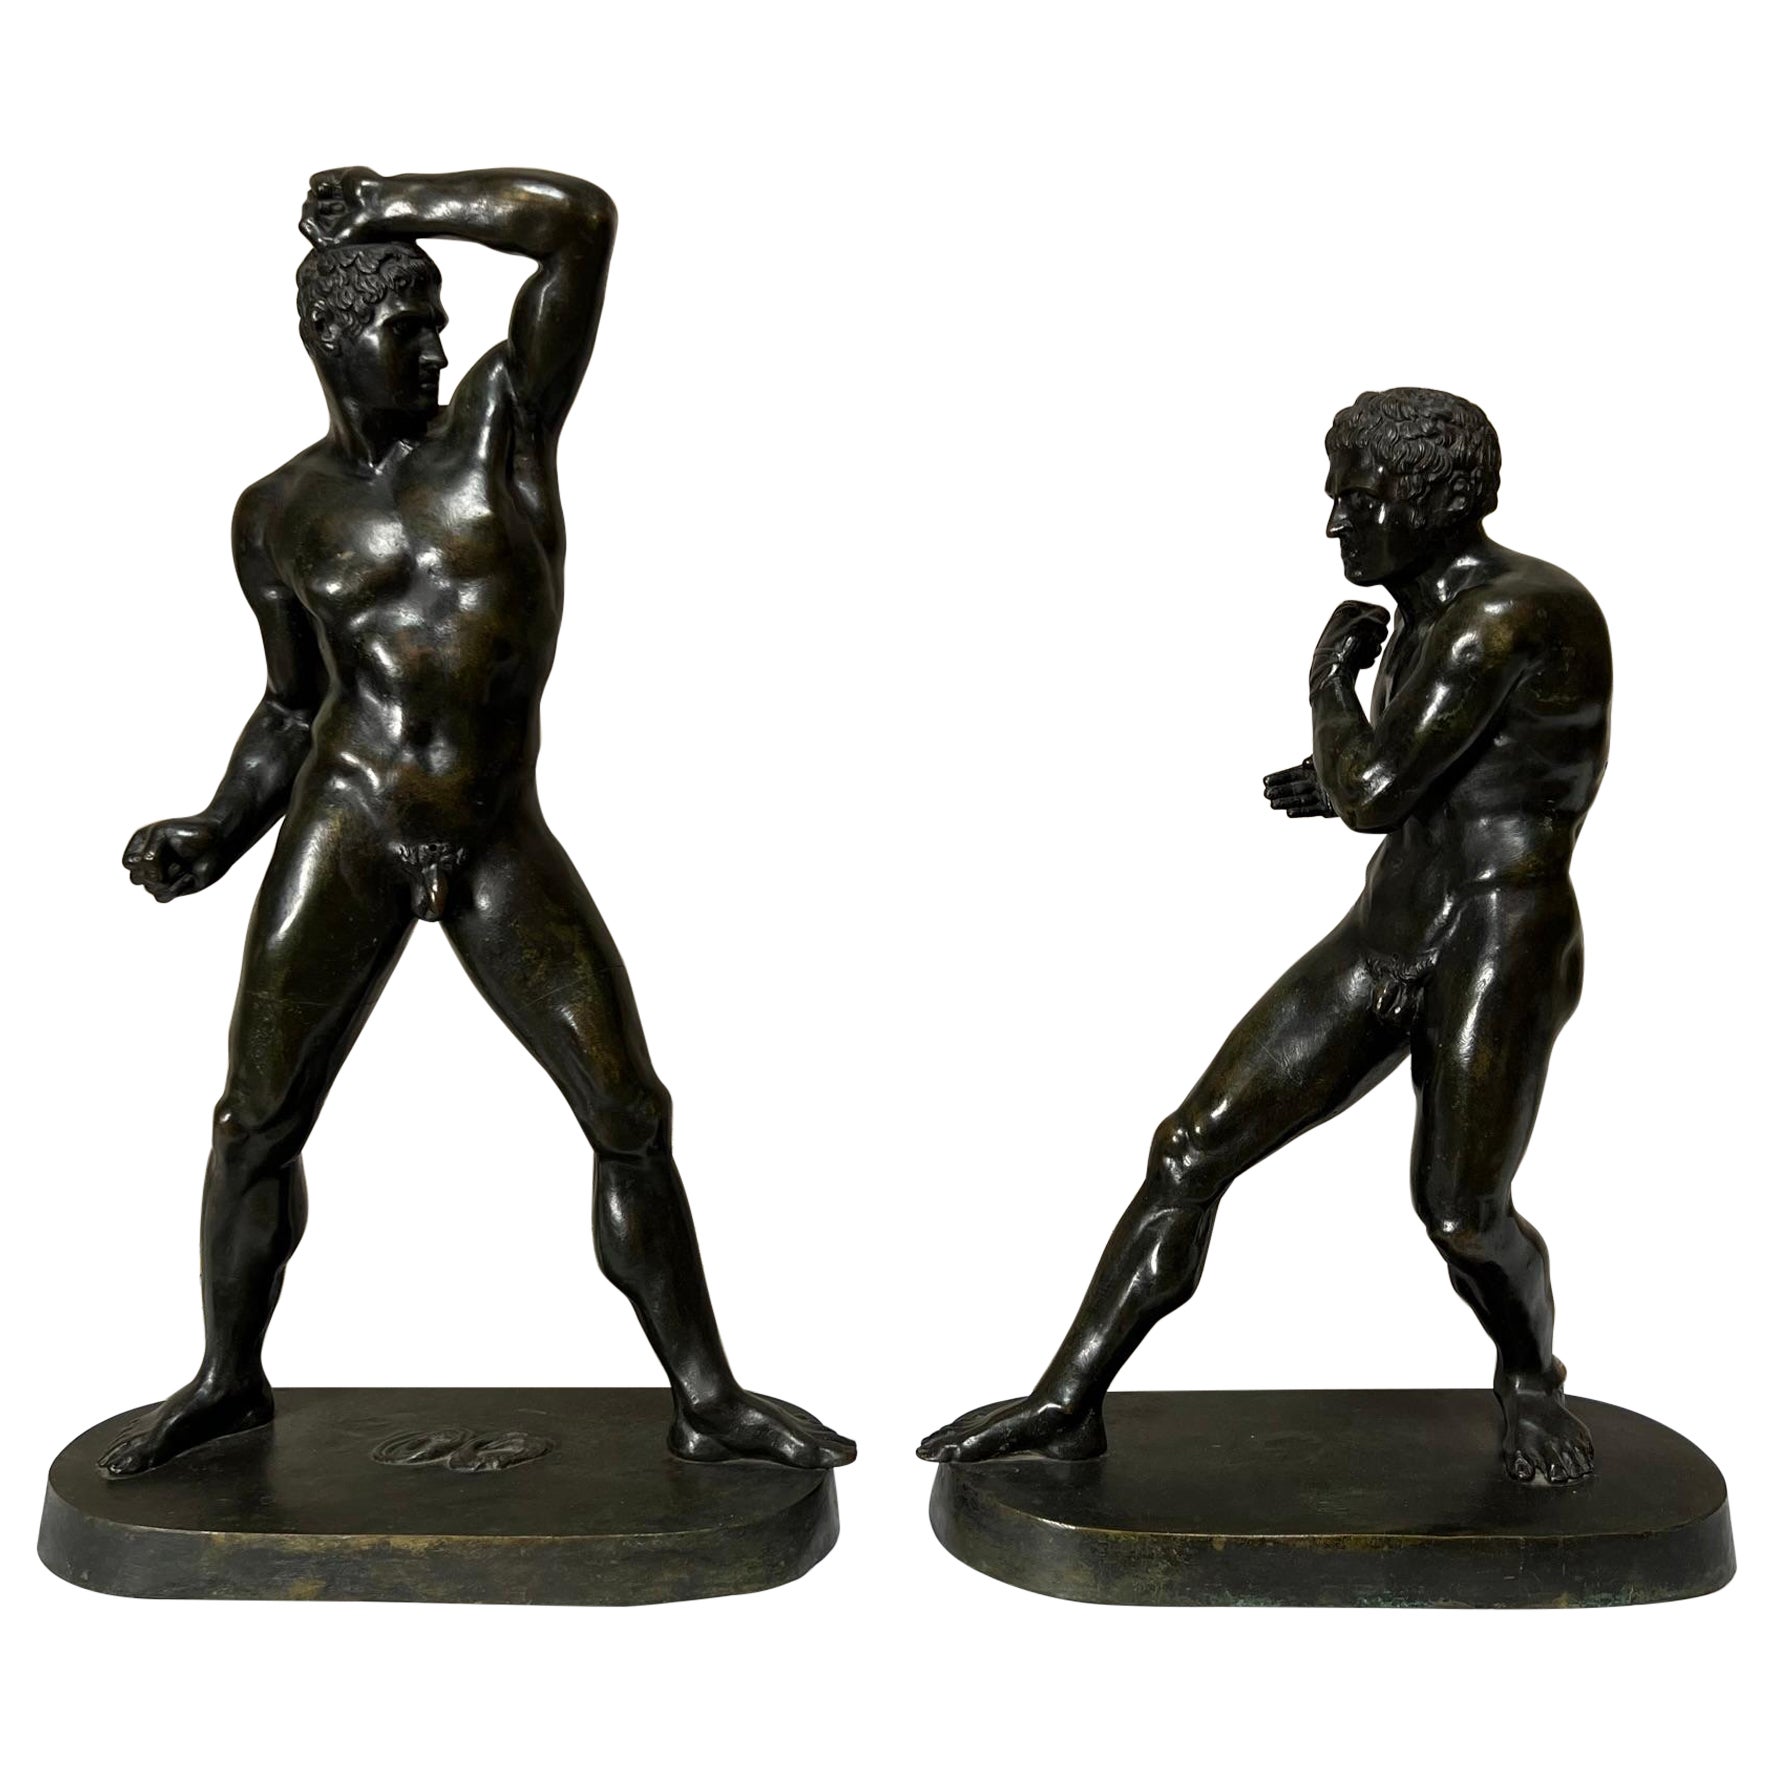  Large Pair of 19th Century Italian Bronzes of Creugas and Demoxenos  For Sale